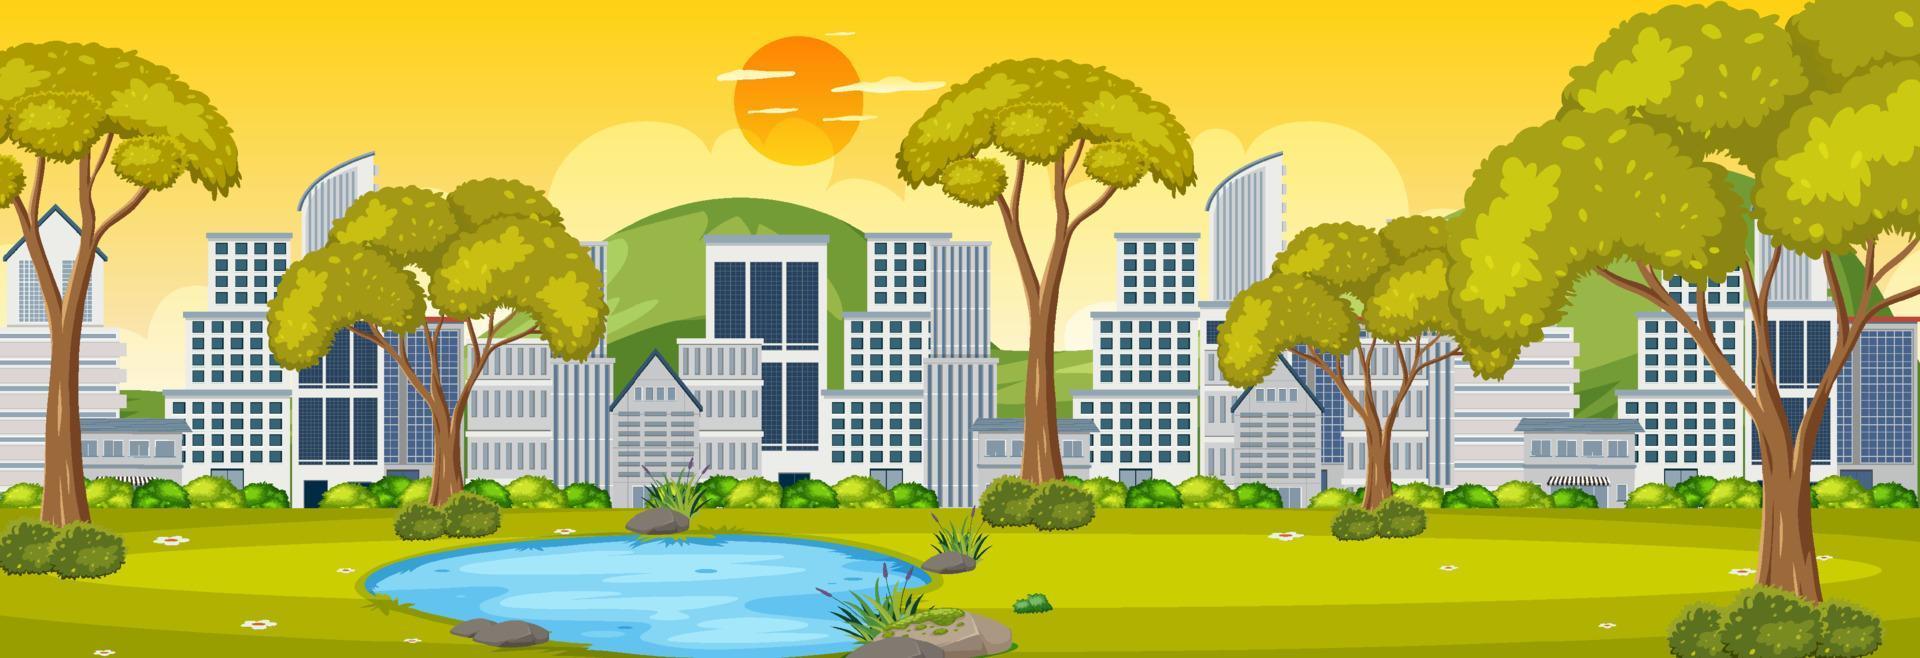 Park horizontal scene with cityscape background at sunrise time vector